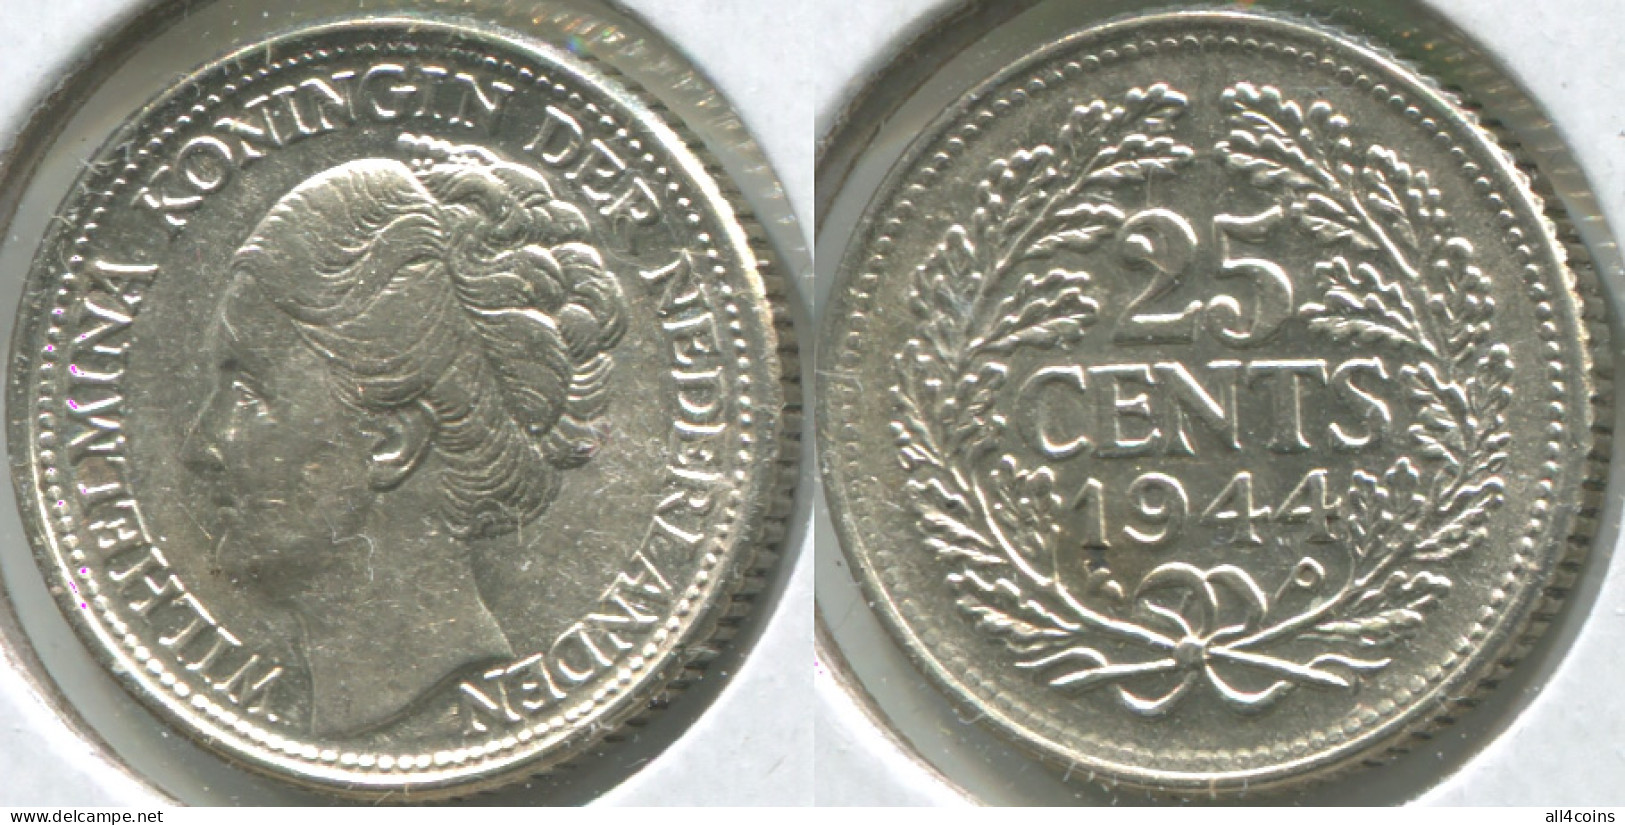 Netherlands. 25 Cents. 1944.P (Silver. Coin KM#164. XF /Unc) - 25 Cent